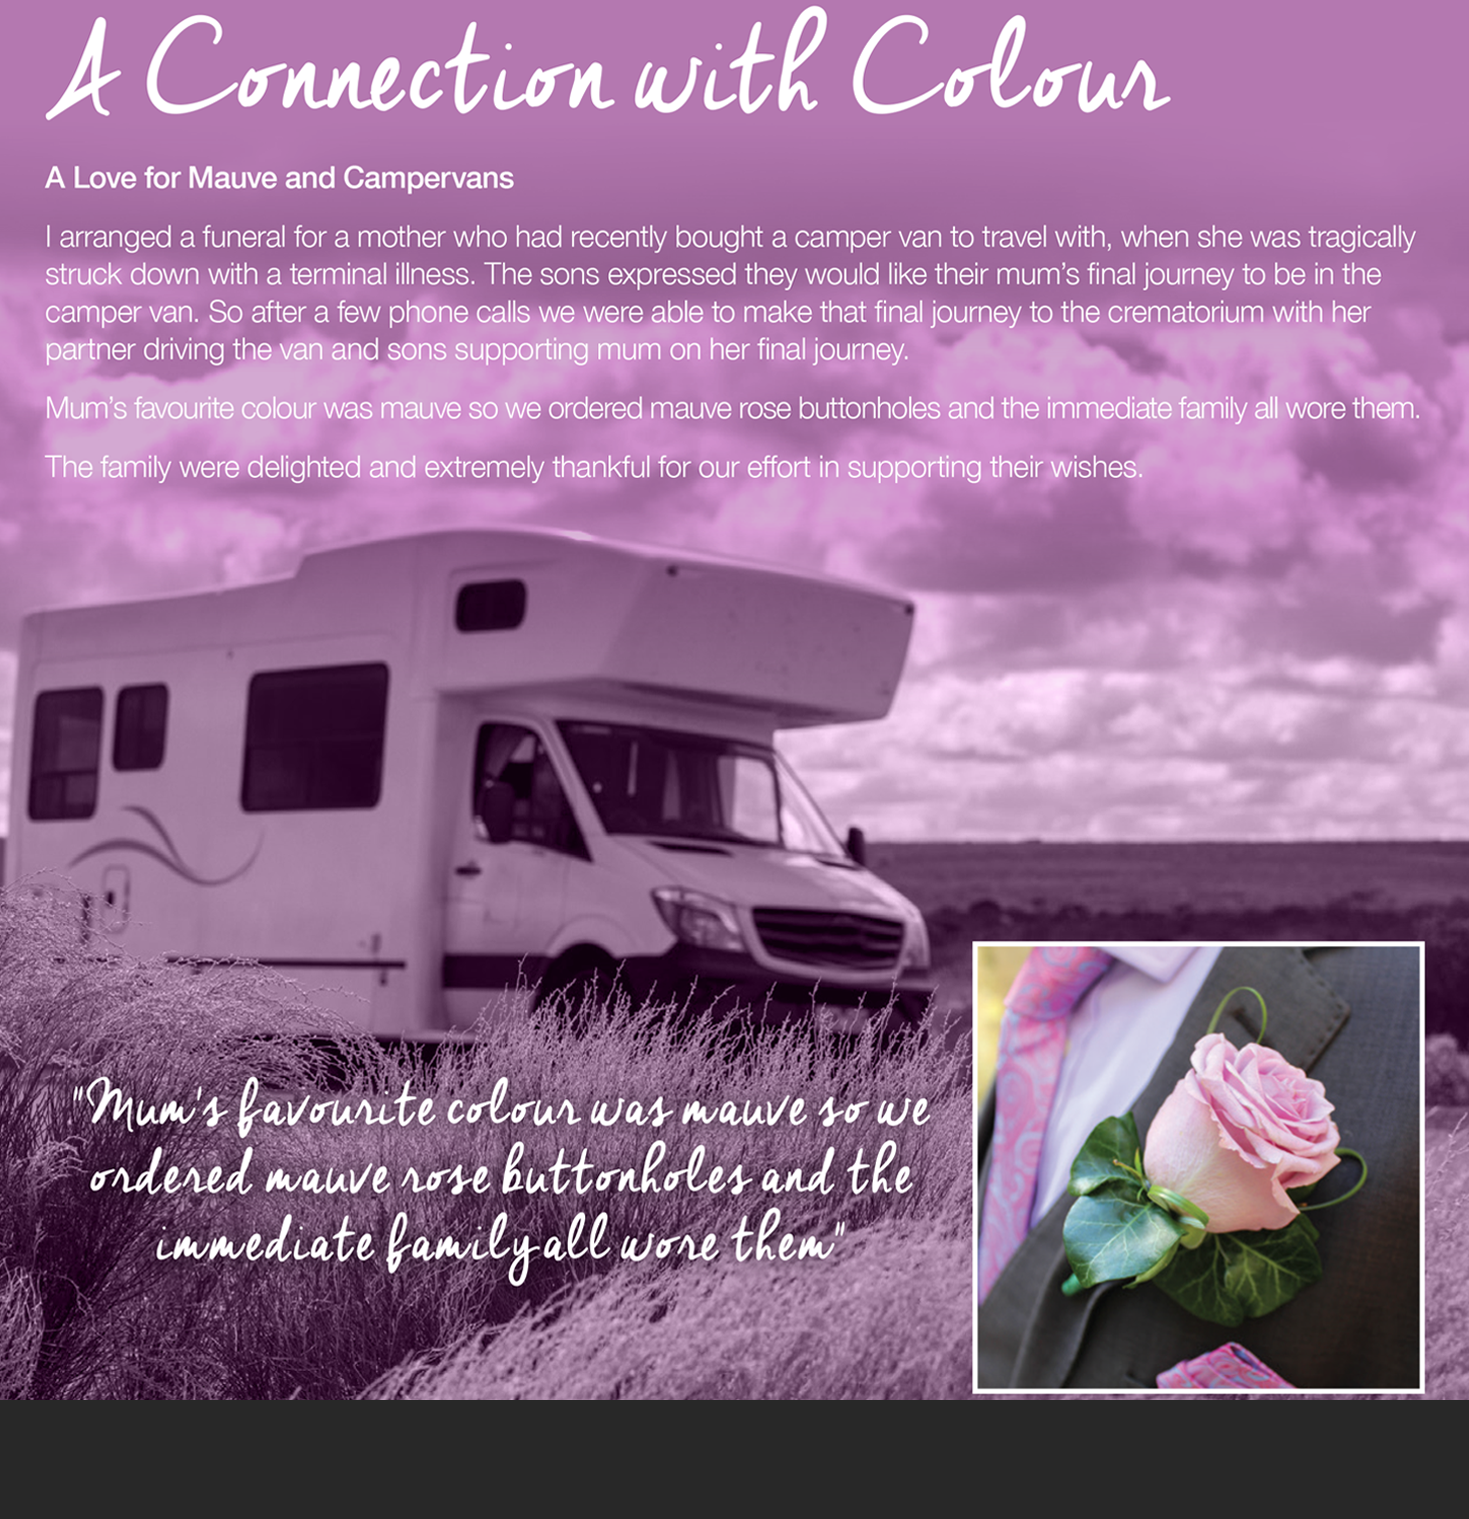 Guardian Funerals Book of Ideas - The Love for Mauve and Campervans